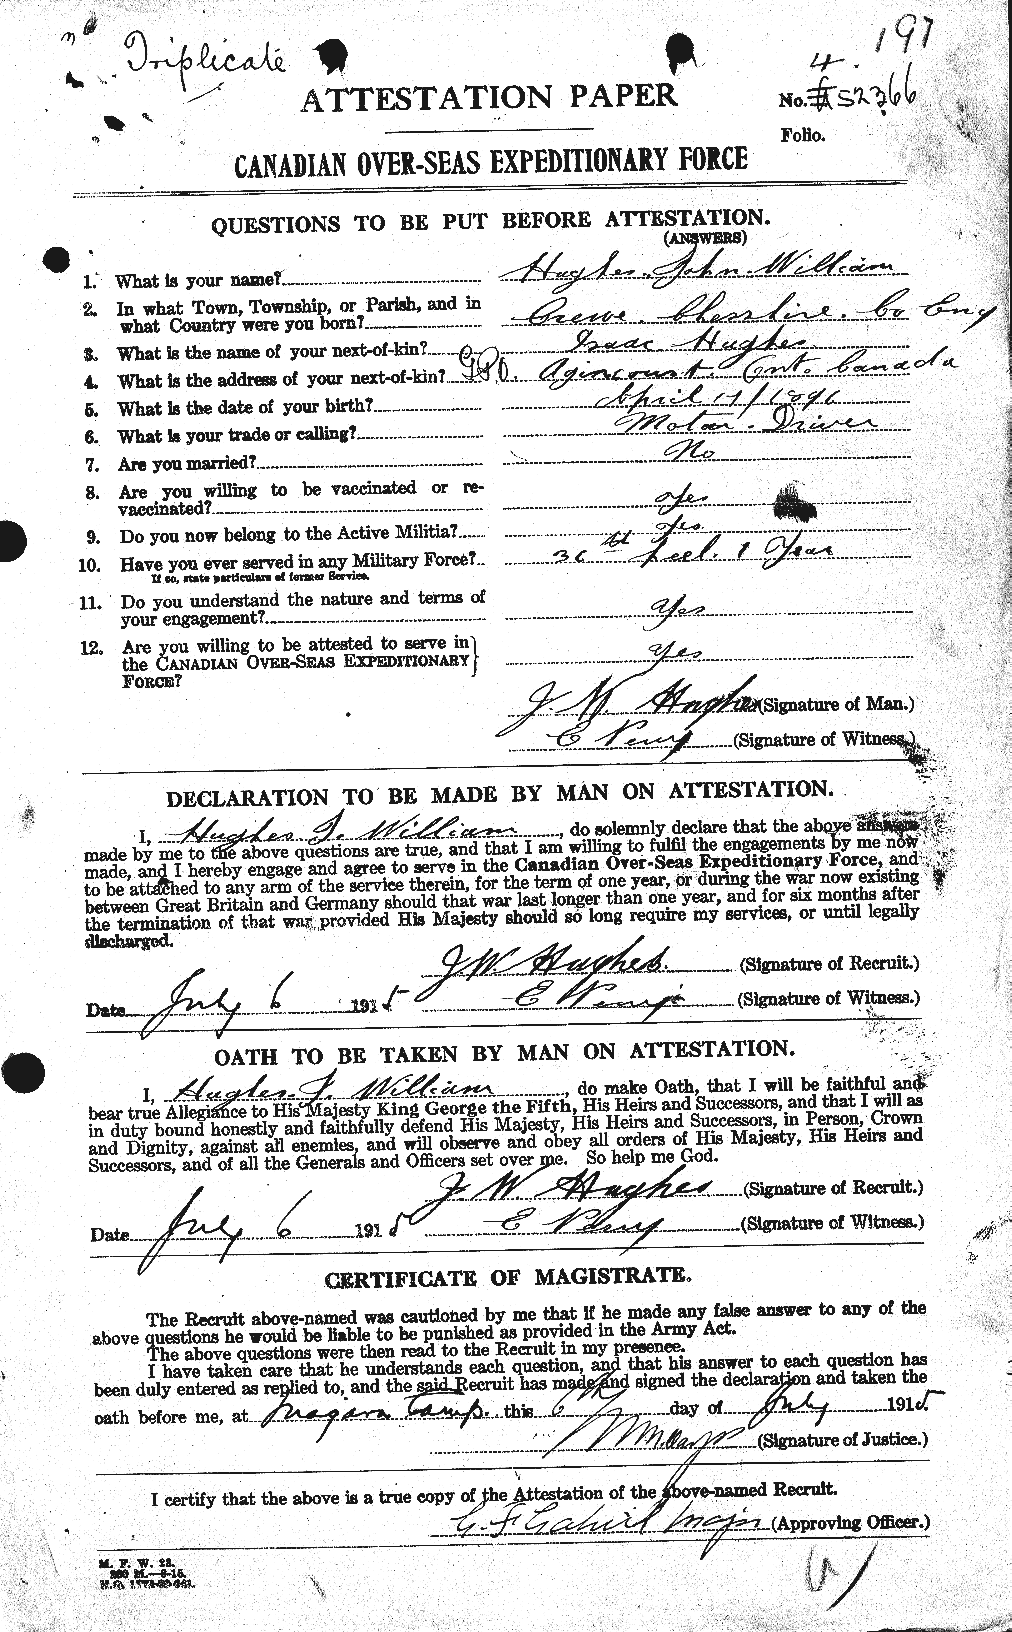 Personnel Records of the First World War - CEF 404061a